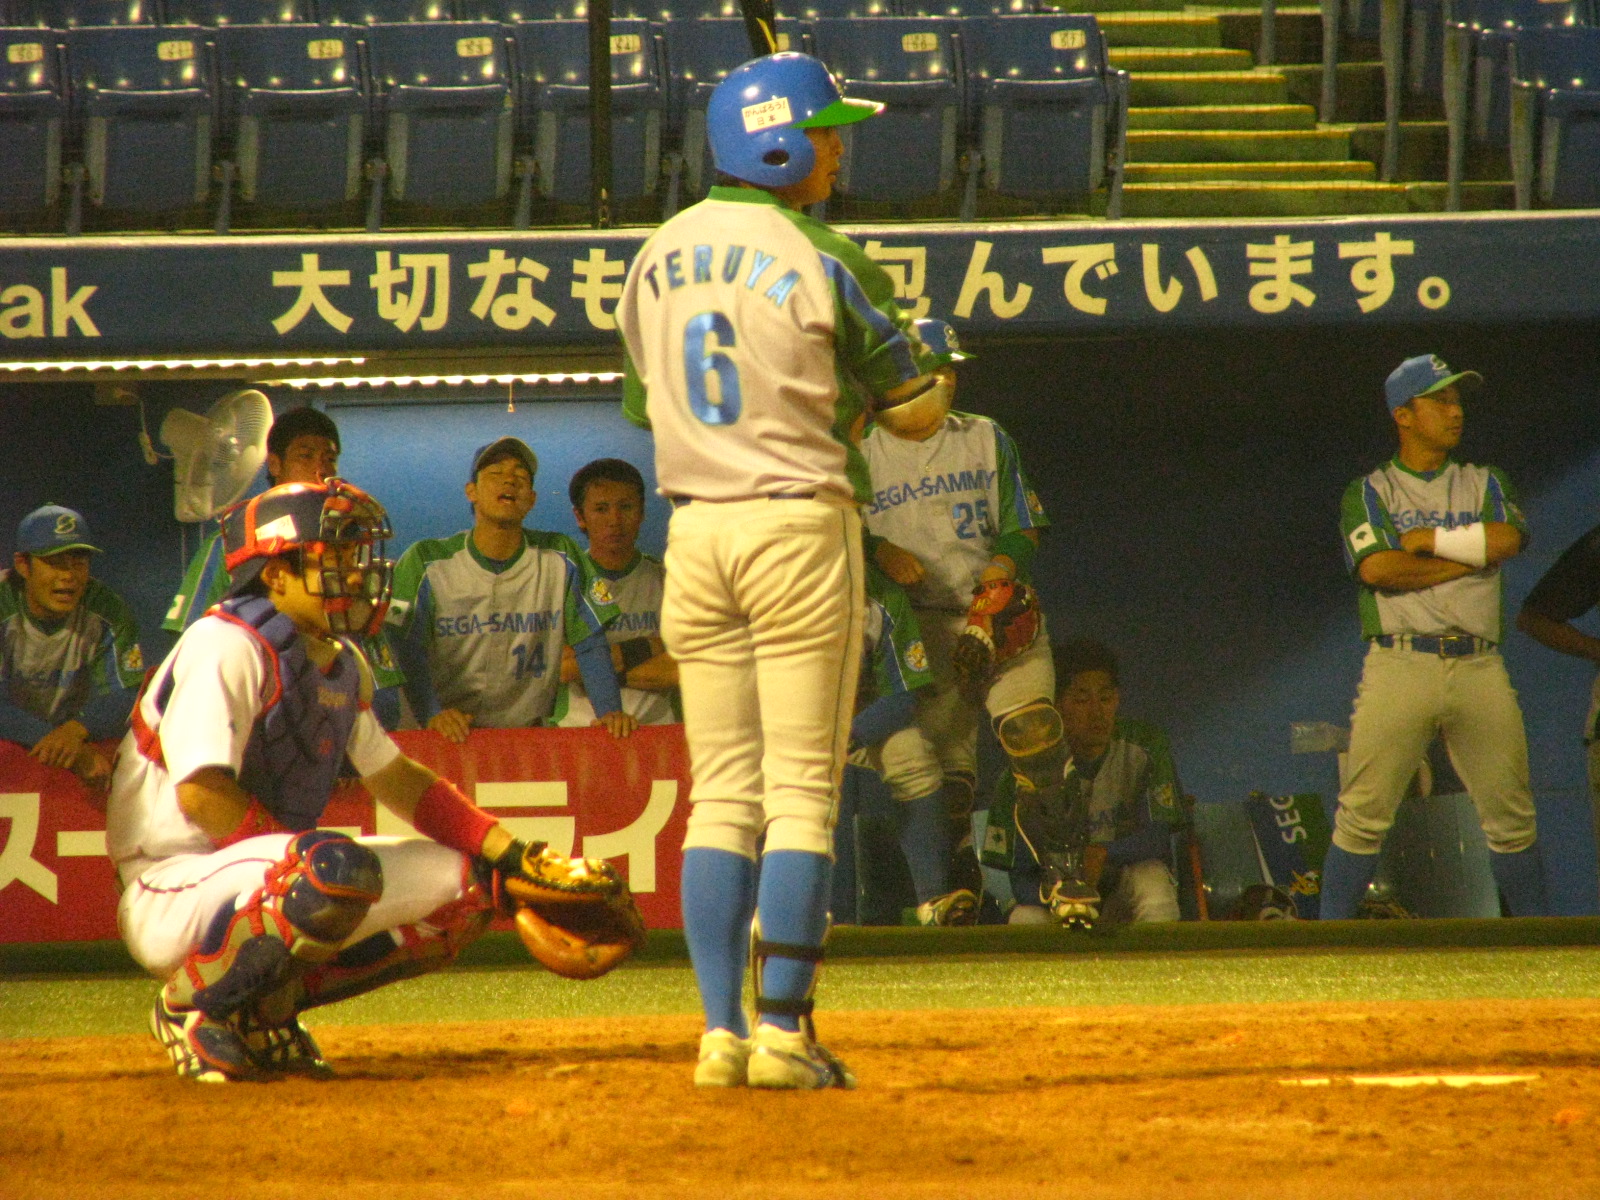 a baseball player standing next to home plate